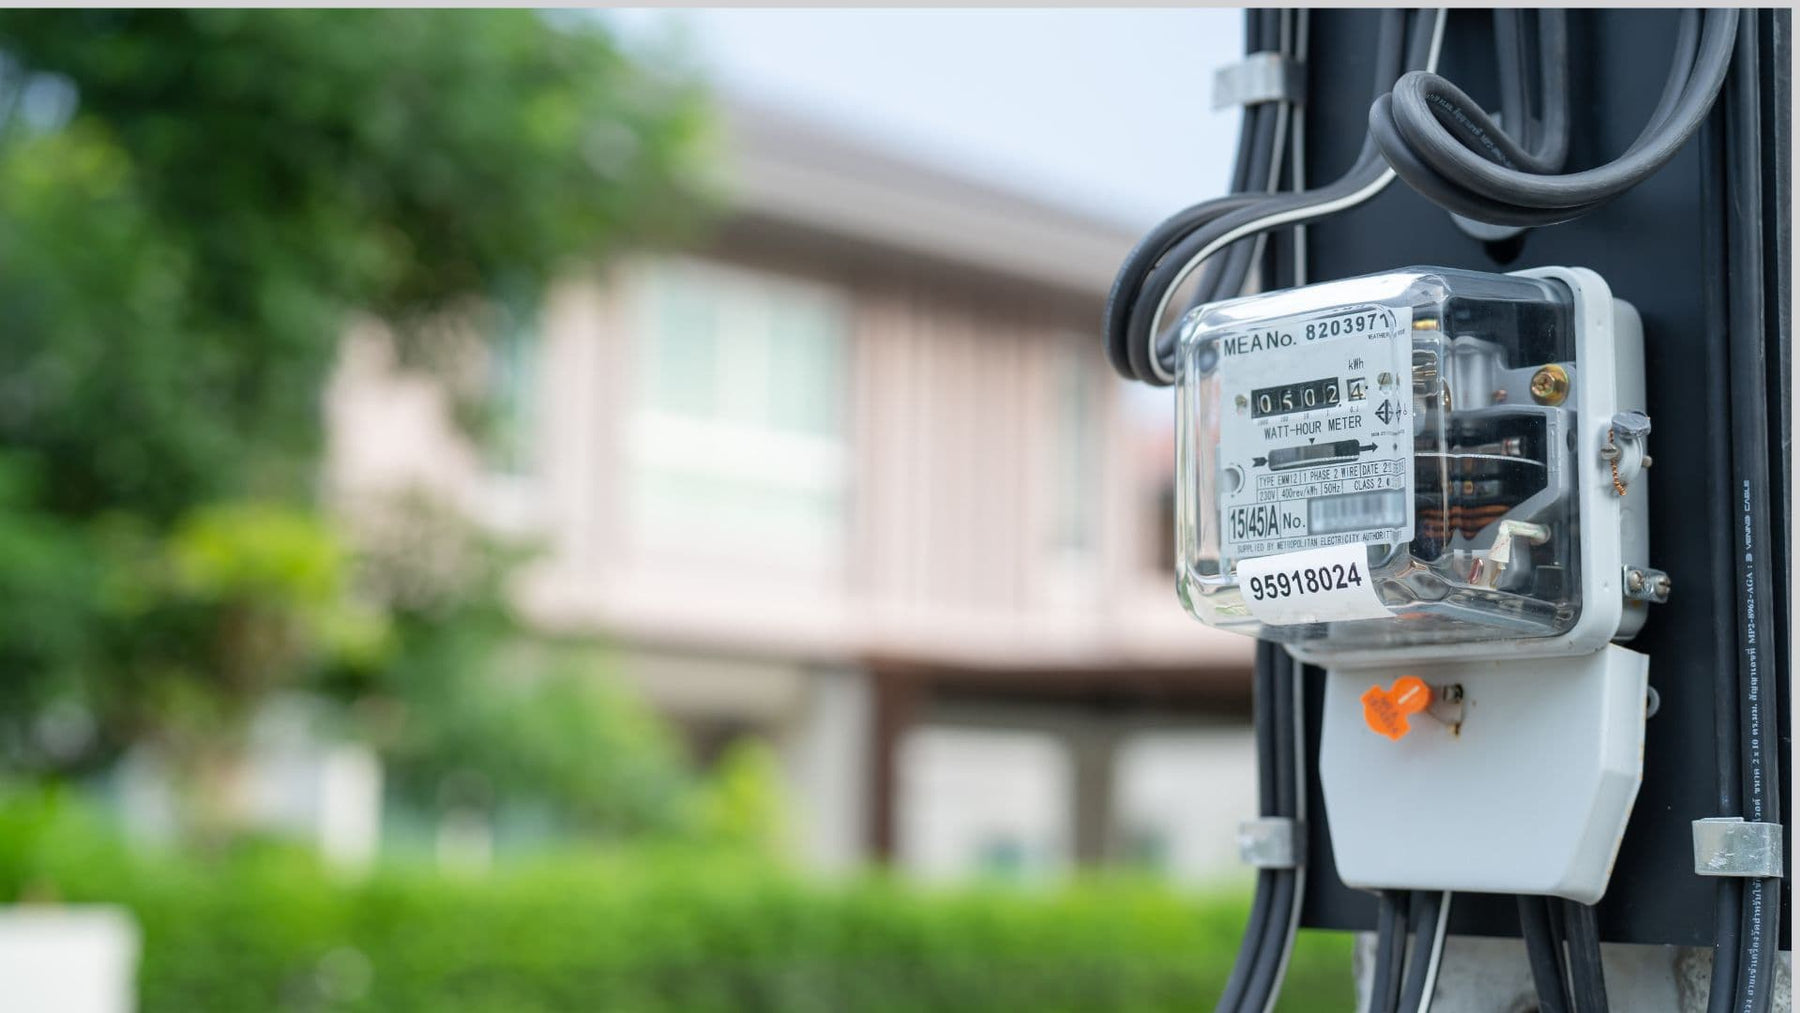 An electricity meter on a pole tracking household electricity usage